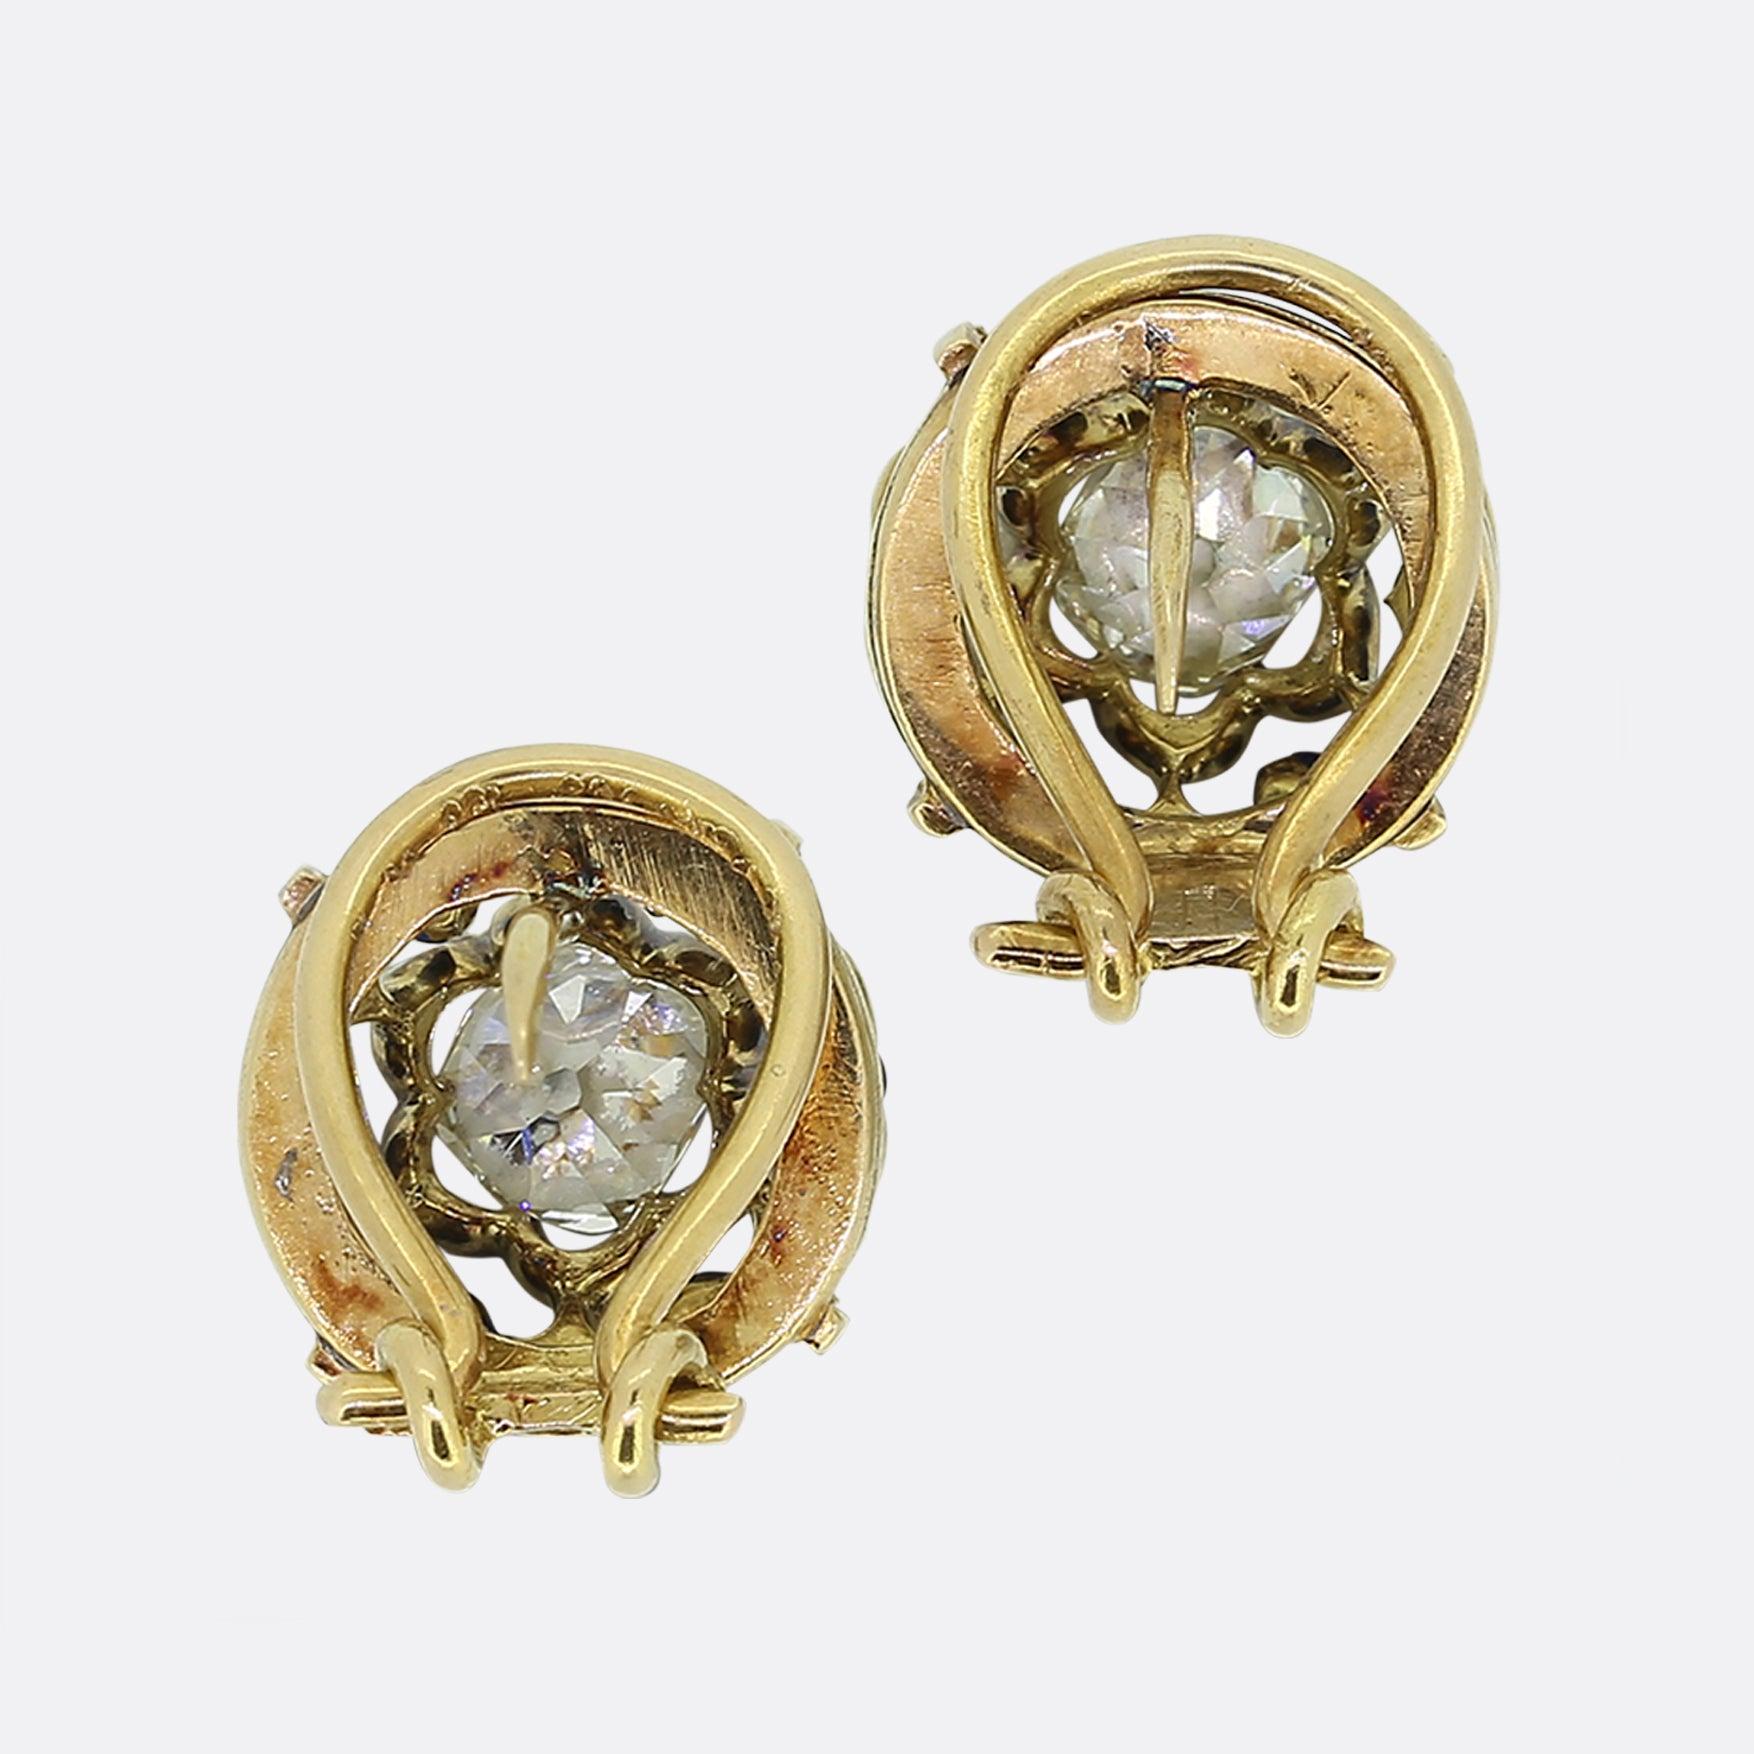 Here we have a delightful pair of diamond earrings from the Victorian era. Each antique piece is identical and presents an open undulating double frame which surrounds an impressive chunky old mine cut diamond. This focal stone is then circulated